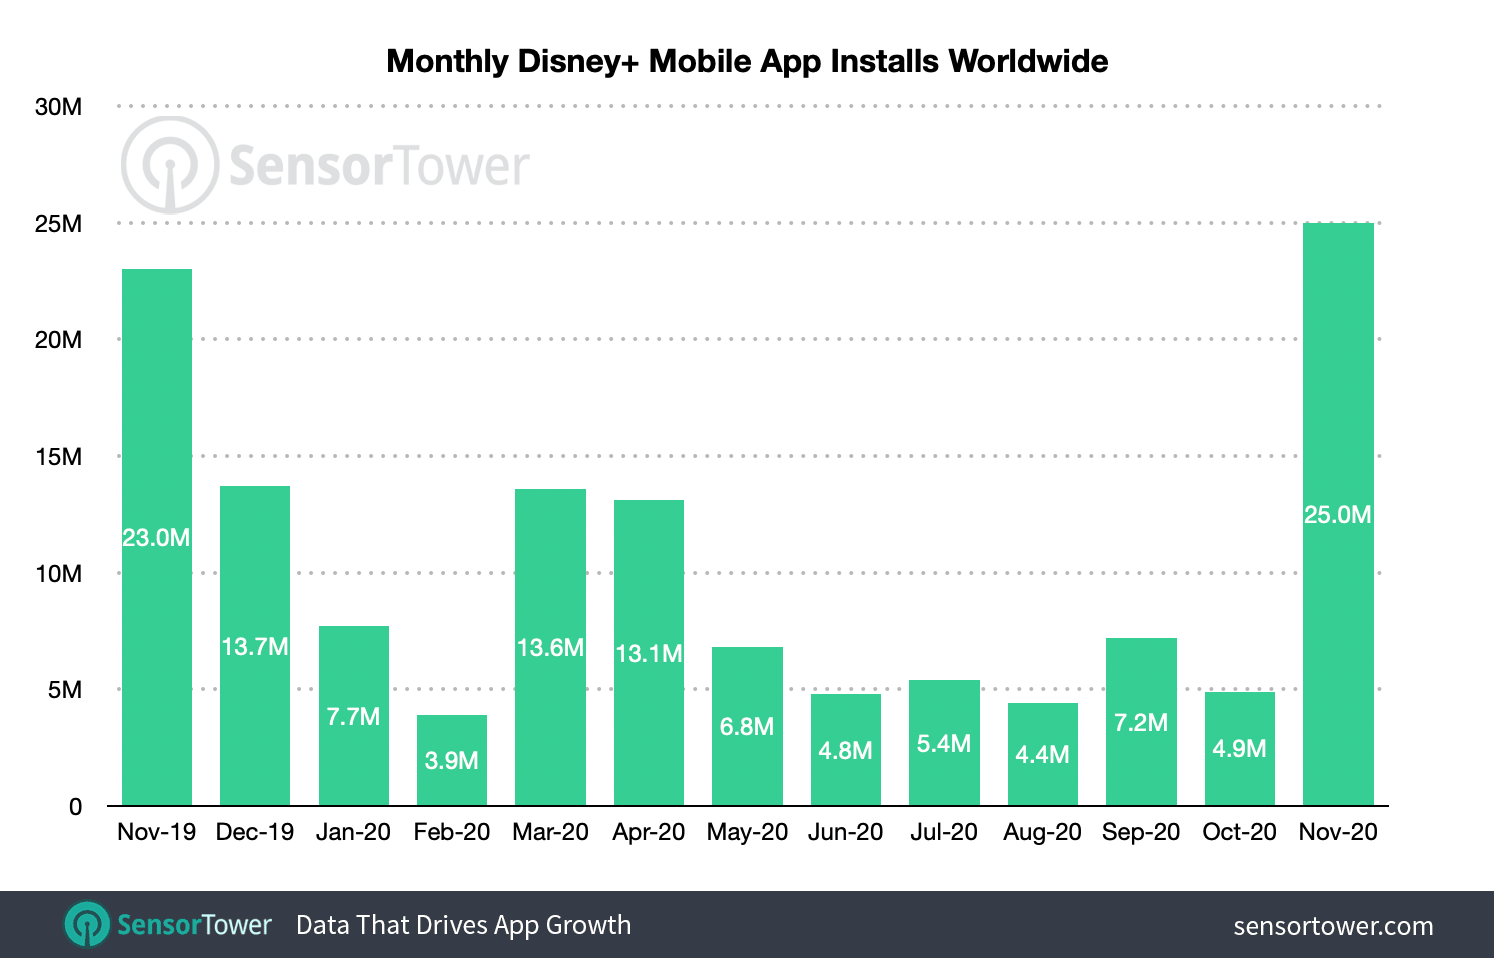 Monthly installs of Disney+ jumped nearly five times month-over-month in November